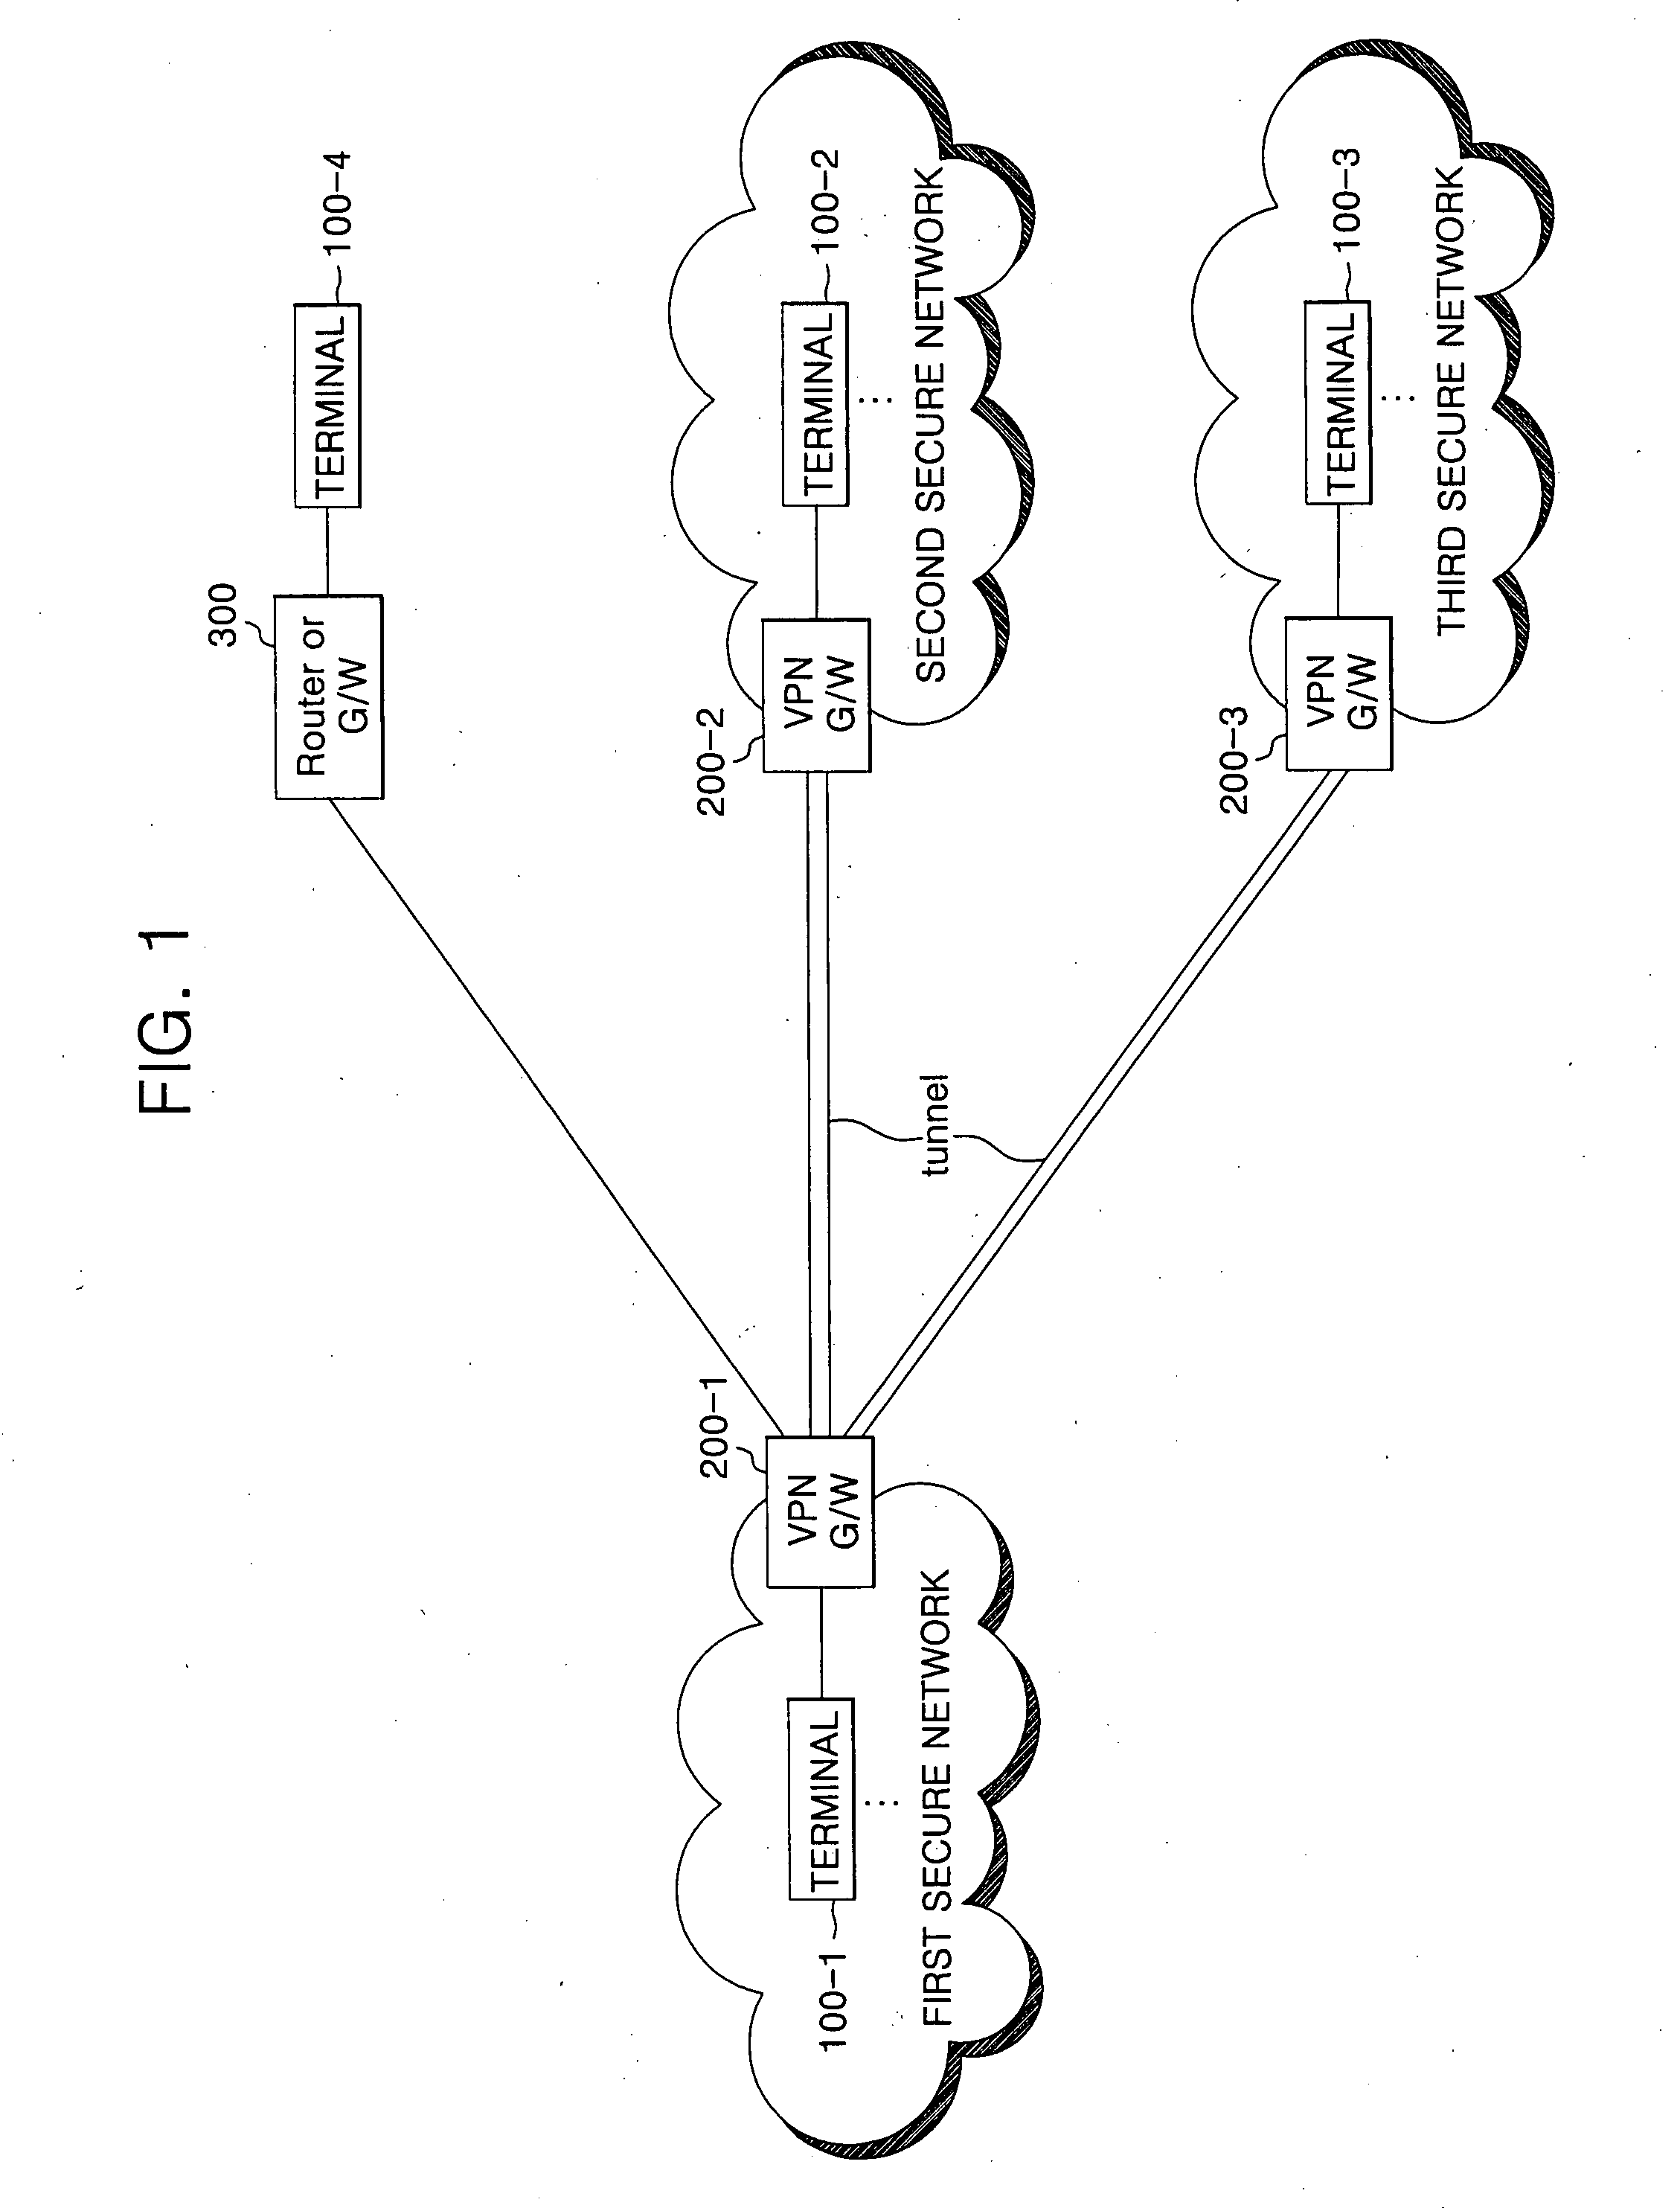 Apparatus and method for processing packets in secure communication system